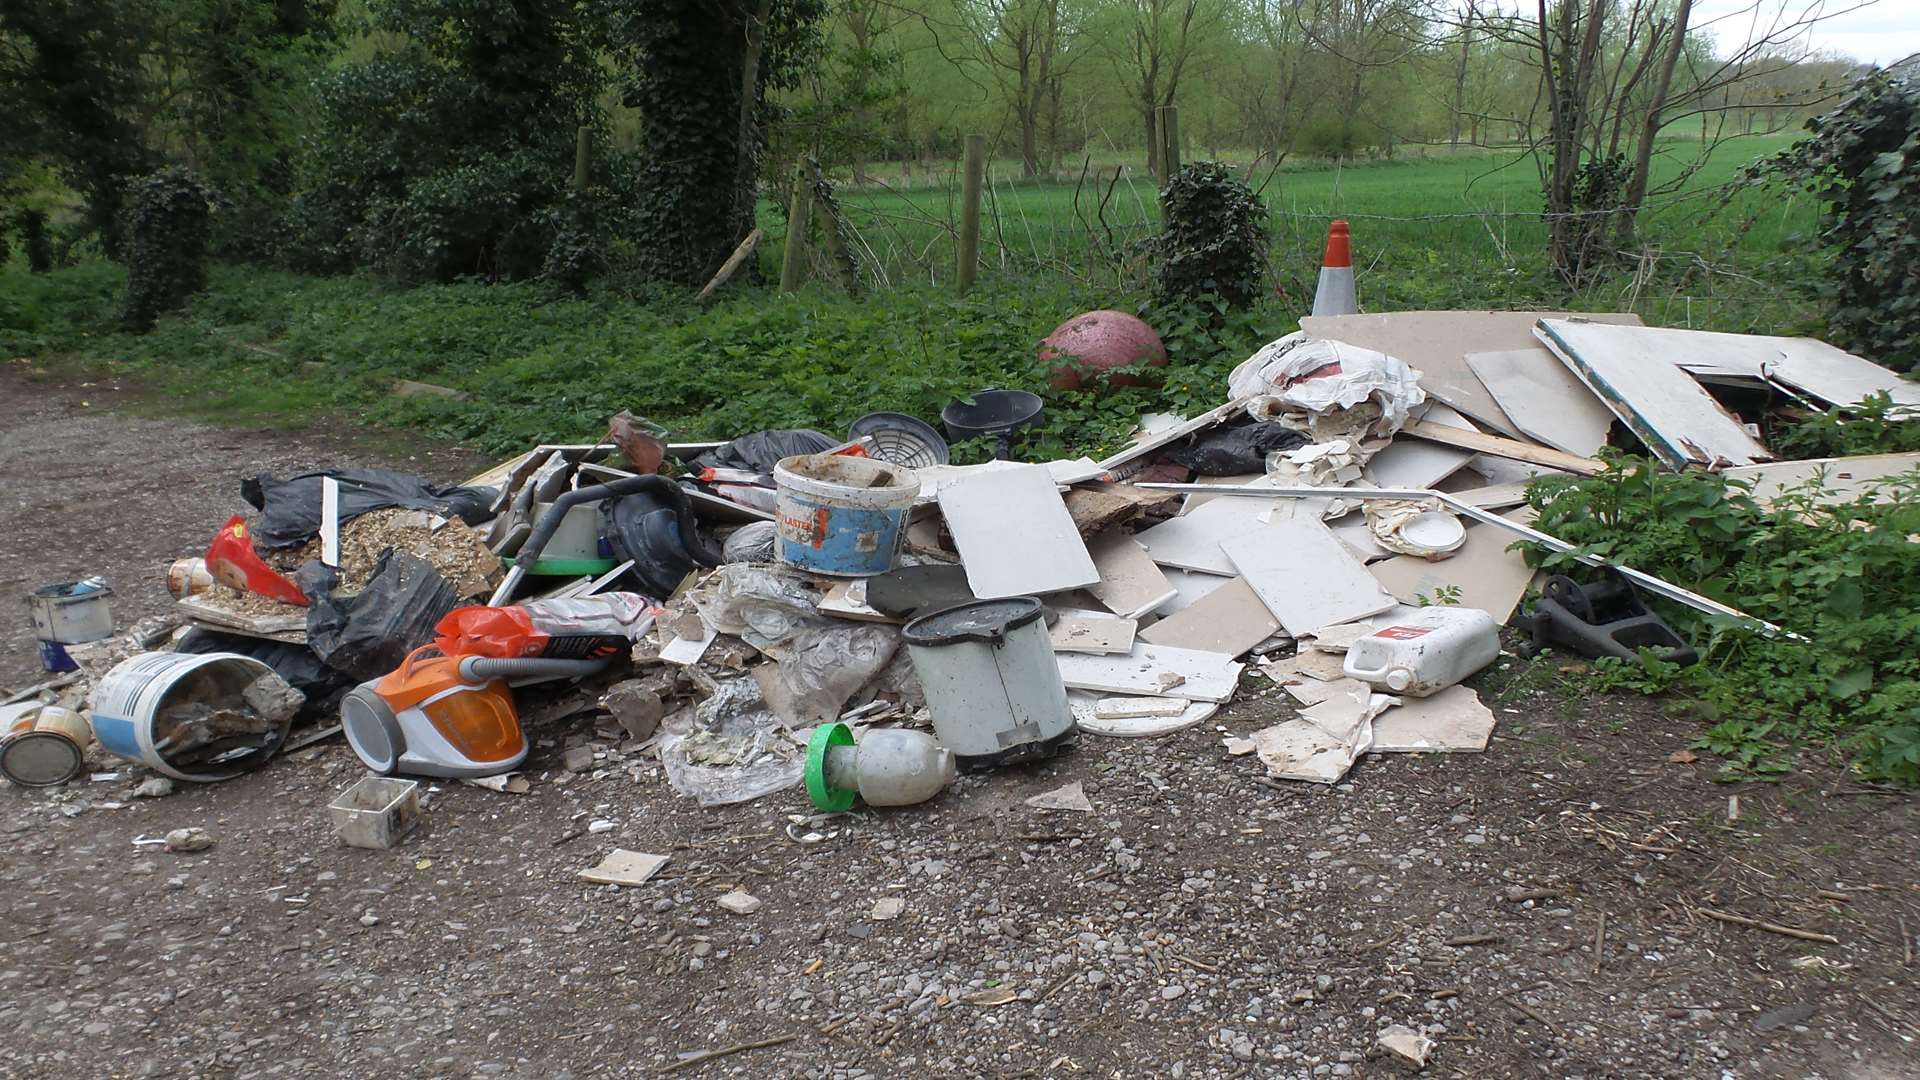 A large load of rubbish has been dumped by the entrance to the church